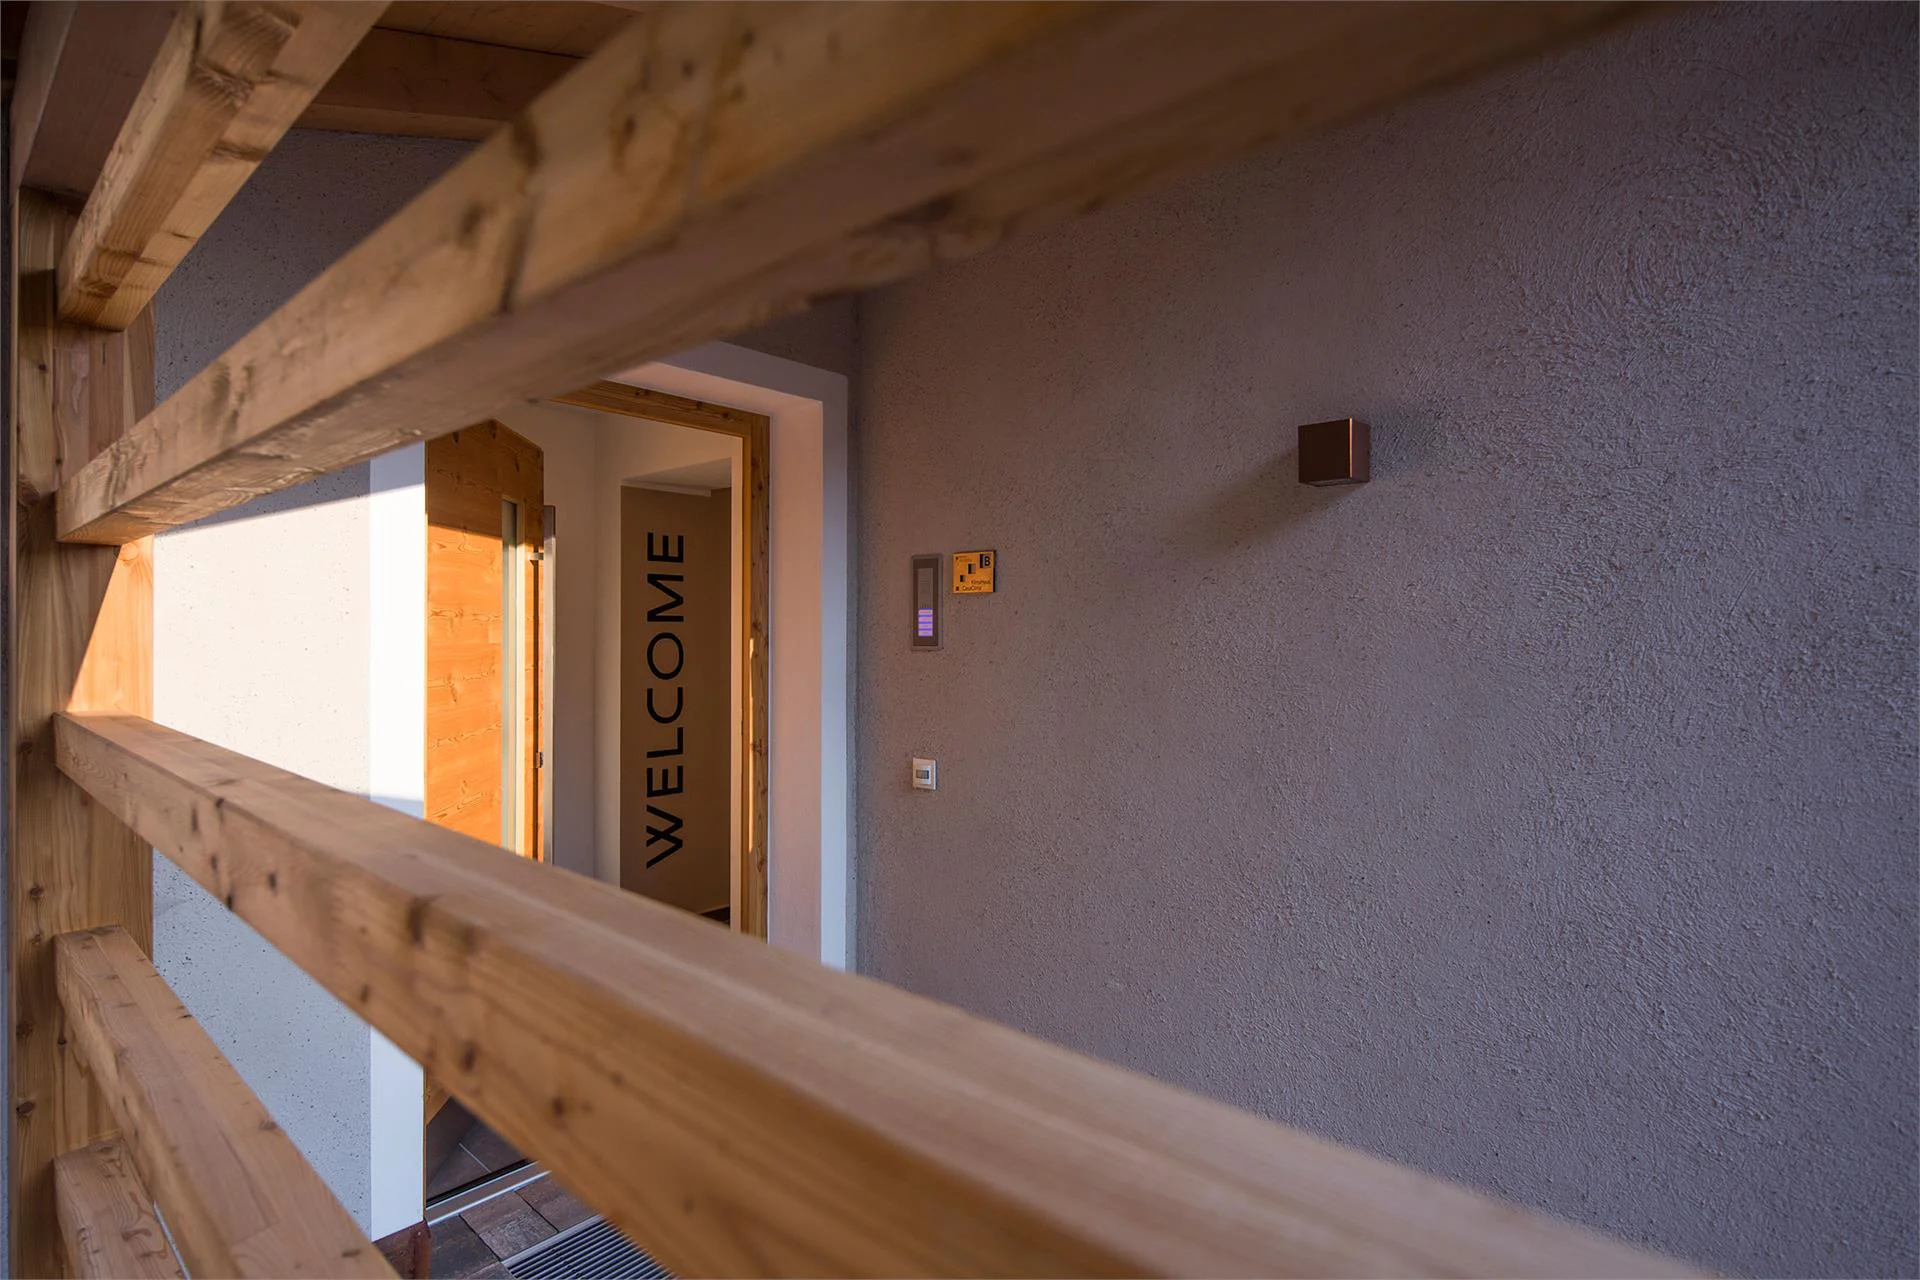 Chalet S Apartments Sand in Taufers/Campo Tures 12 suedtirol.info